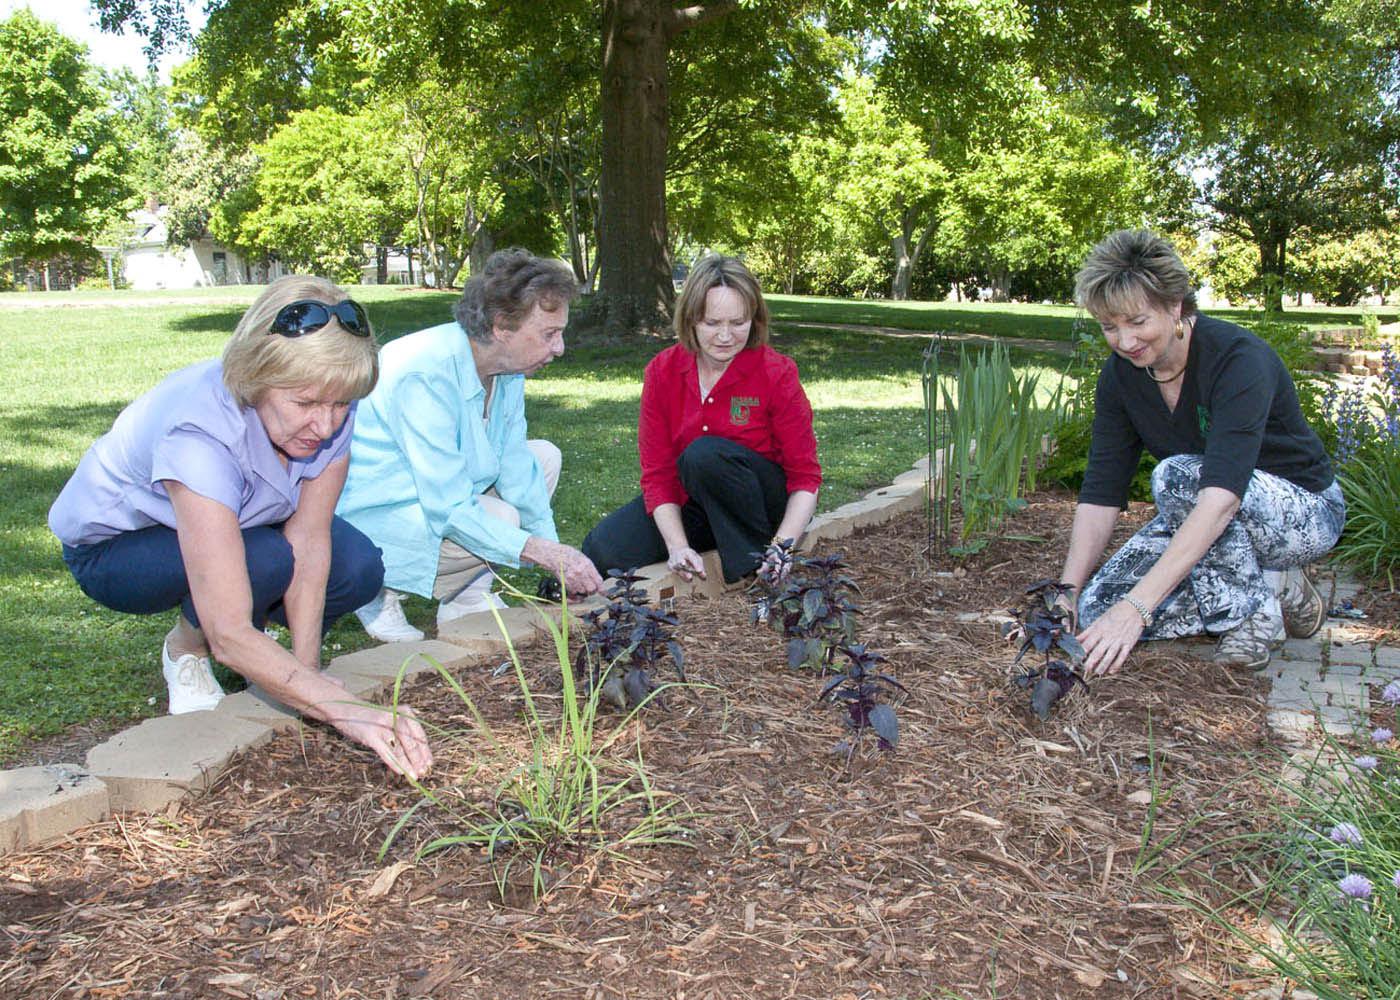 For some, gardening is a passion that leads to community service, but for others, gardening is just hard work. Lowndes County Master Gardeners, from left, Jean Wilson, Mary Faglie, Jennifer Duzan and Nell Thomas examine some of the herbs growing in the garden they renovated for the Culinary Institute at Mississippi University for Women. (Photo by MSU Ag Communications/Scott Corey)